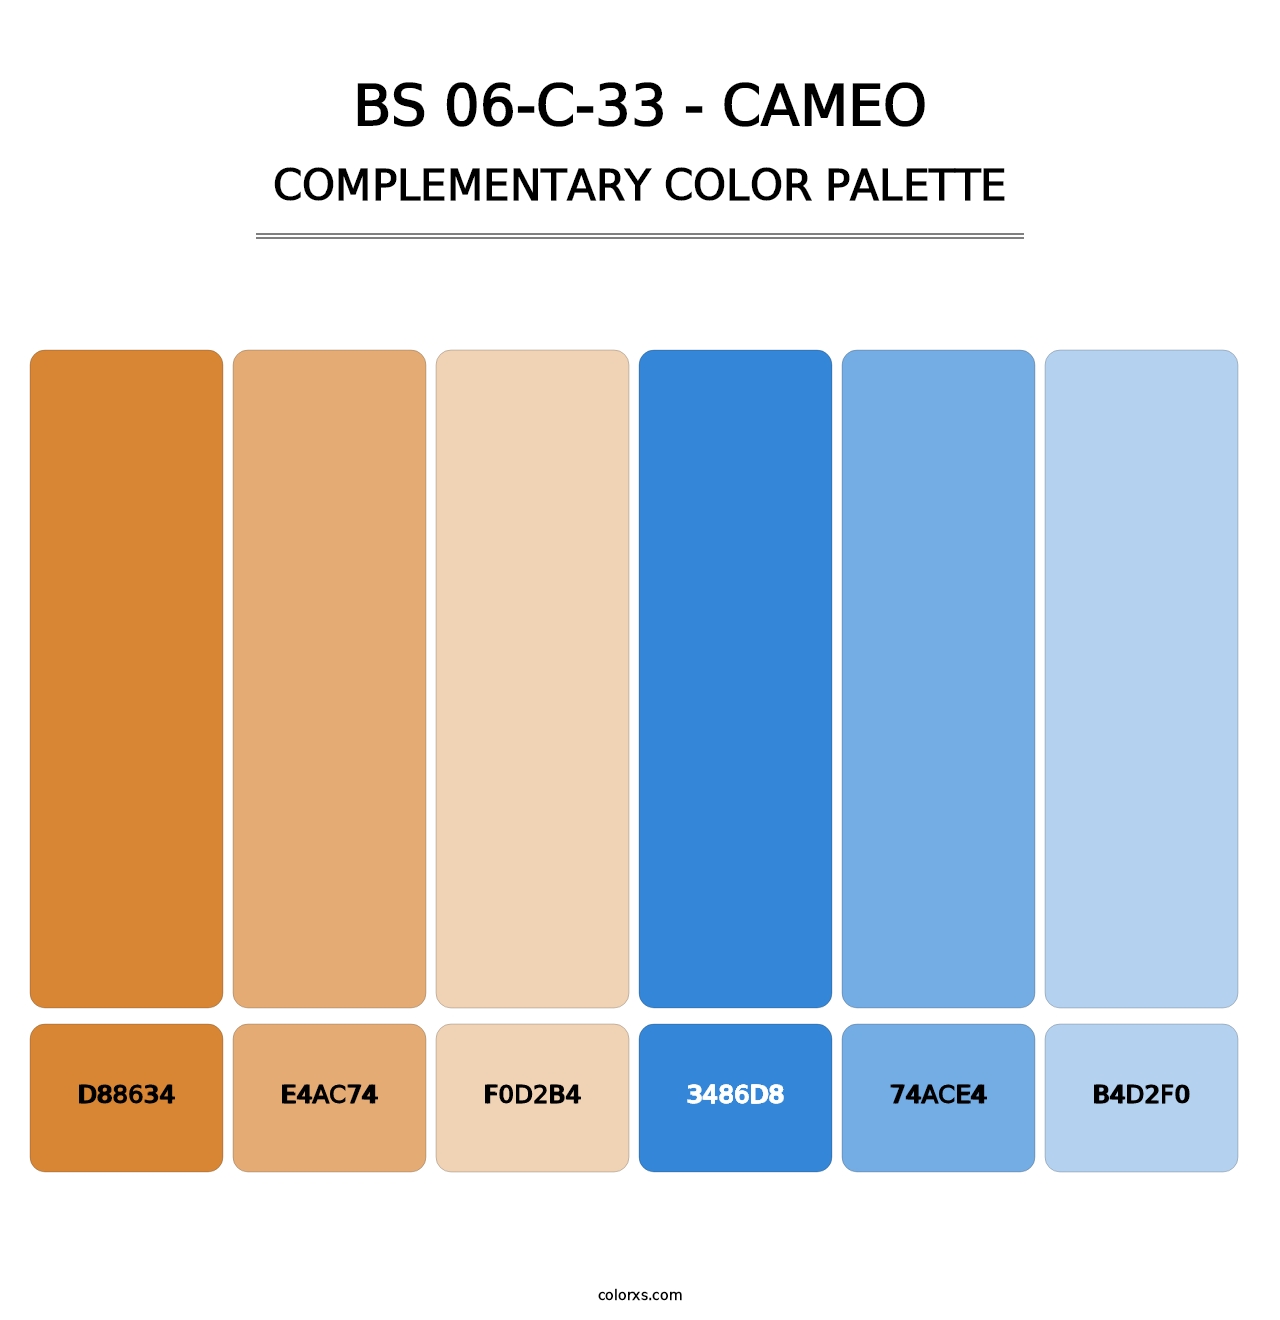 BS 06-C-33 - Cameo - Complementary Color Palette